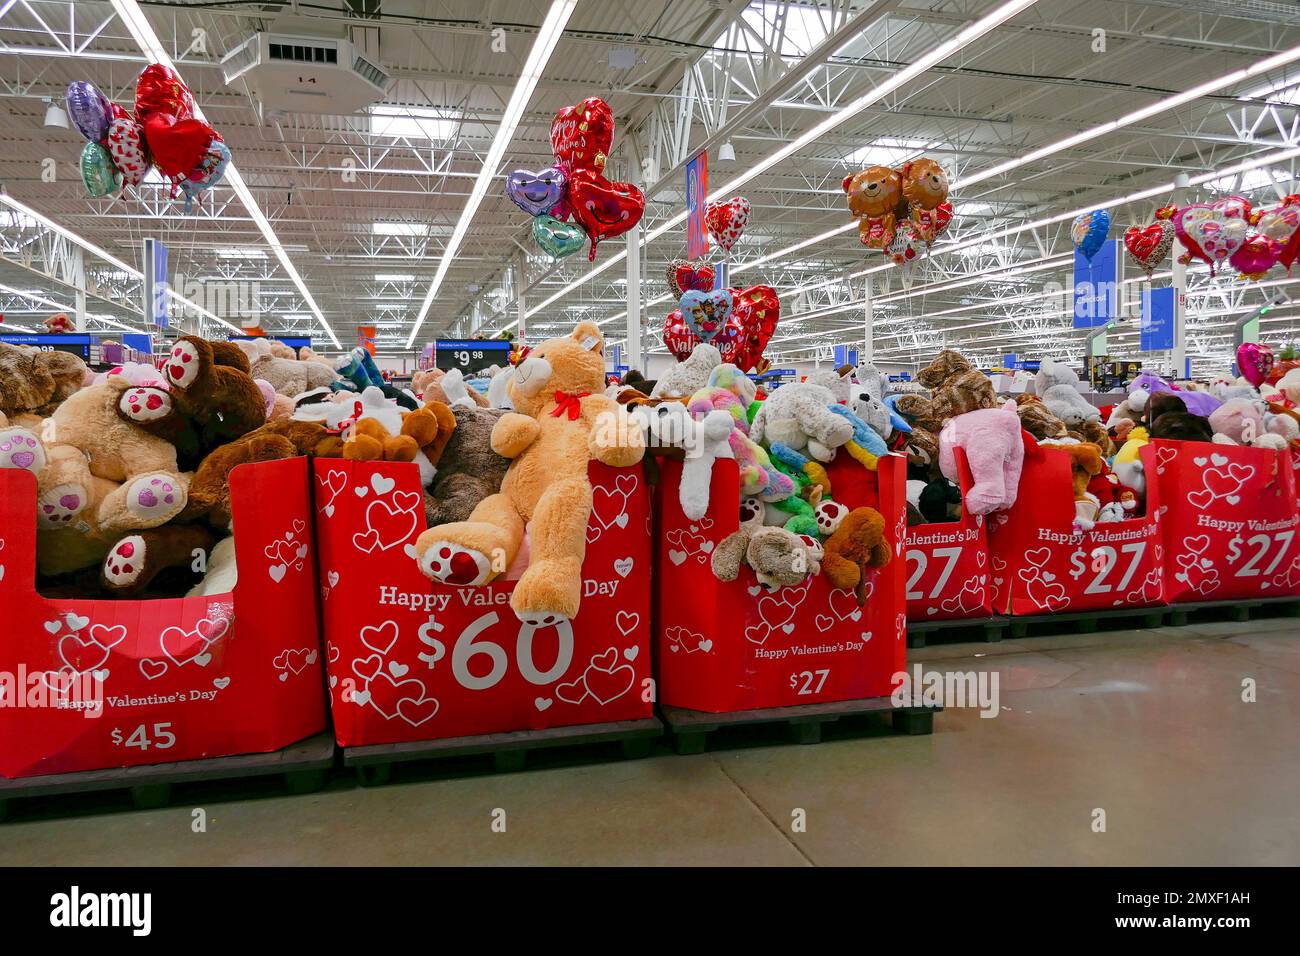 Large stuffed Valentines day animals for sale in a local Walmart store in North Florida. Stock Photo